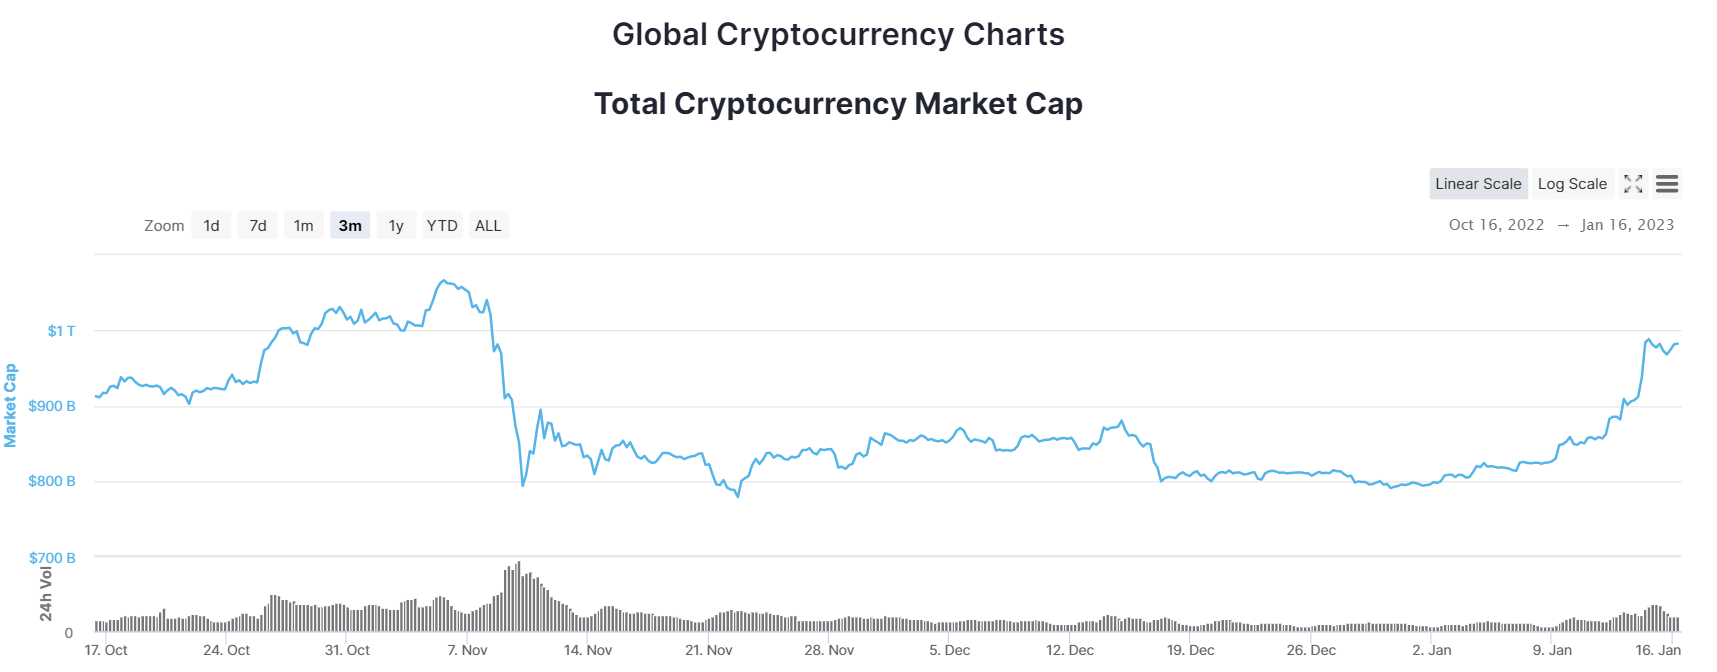 Total cryptocurrency market capitalization as of January 16, 2023. Source: CoinMarketcap